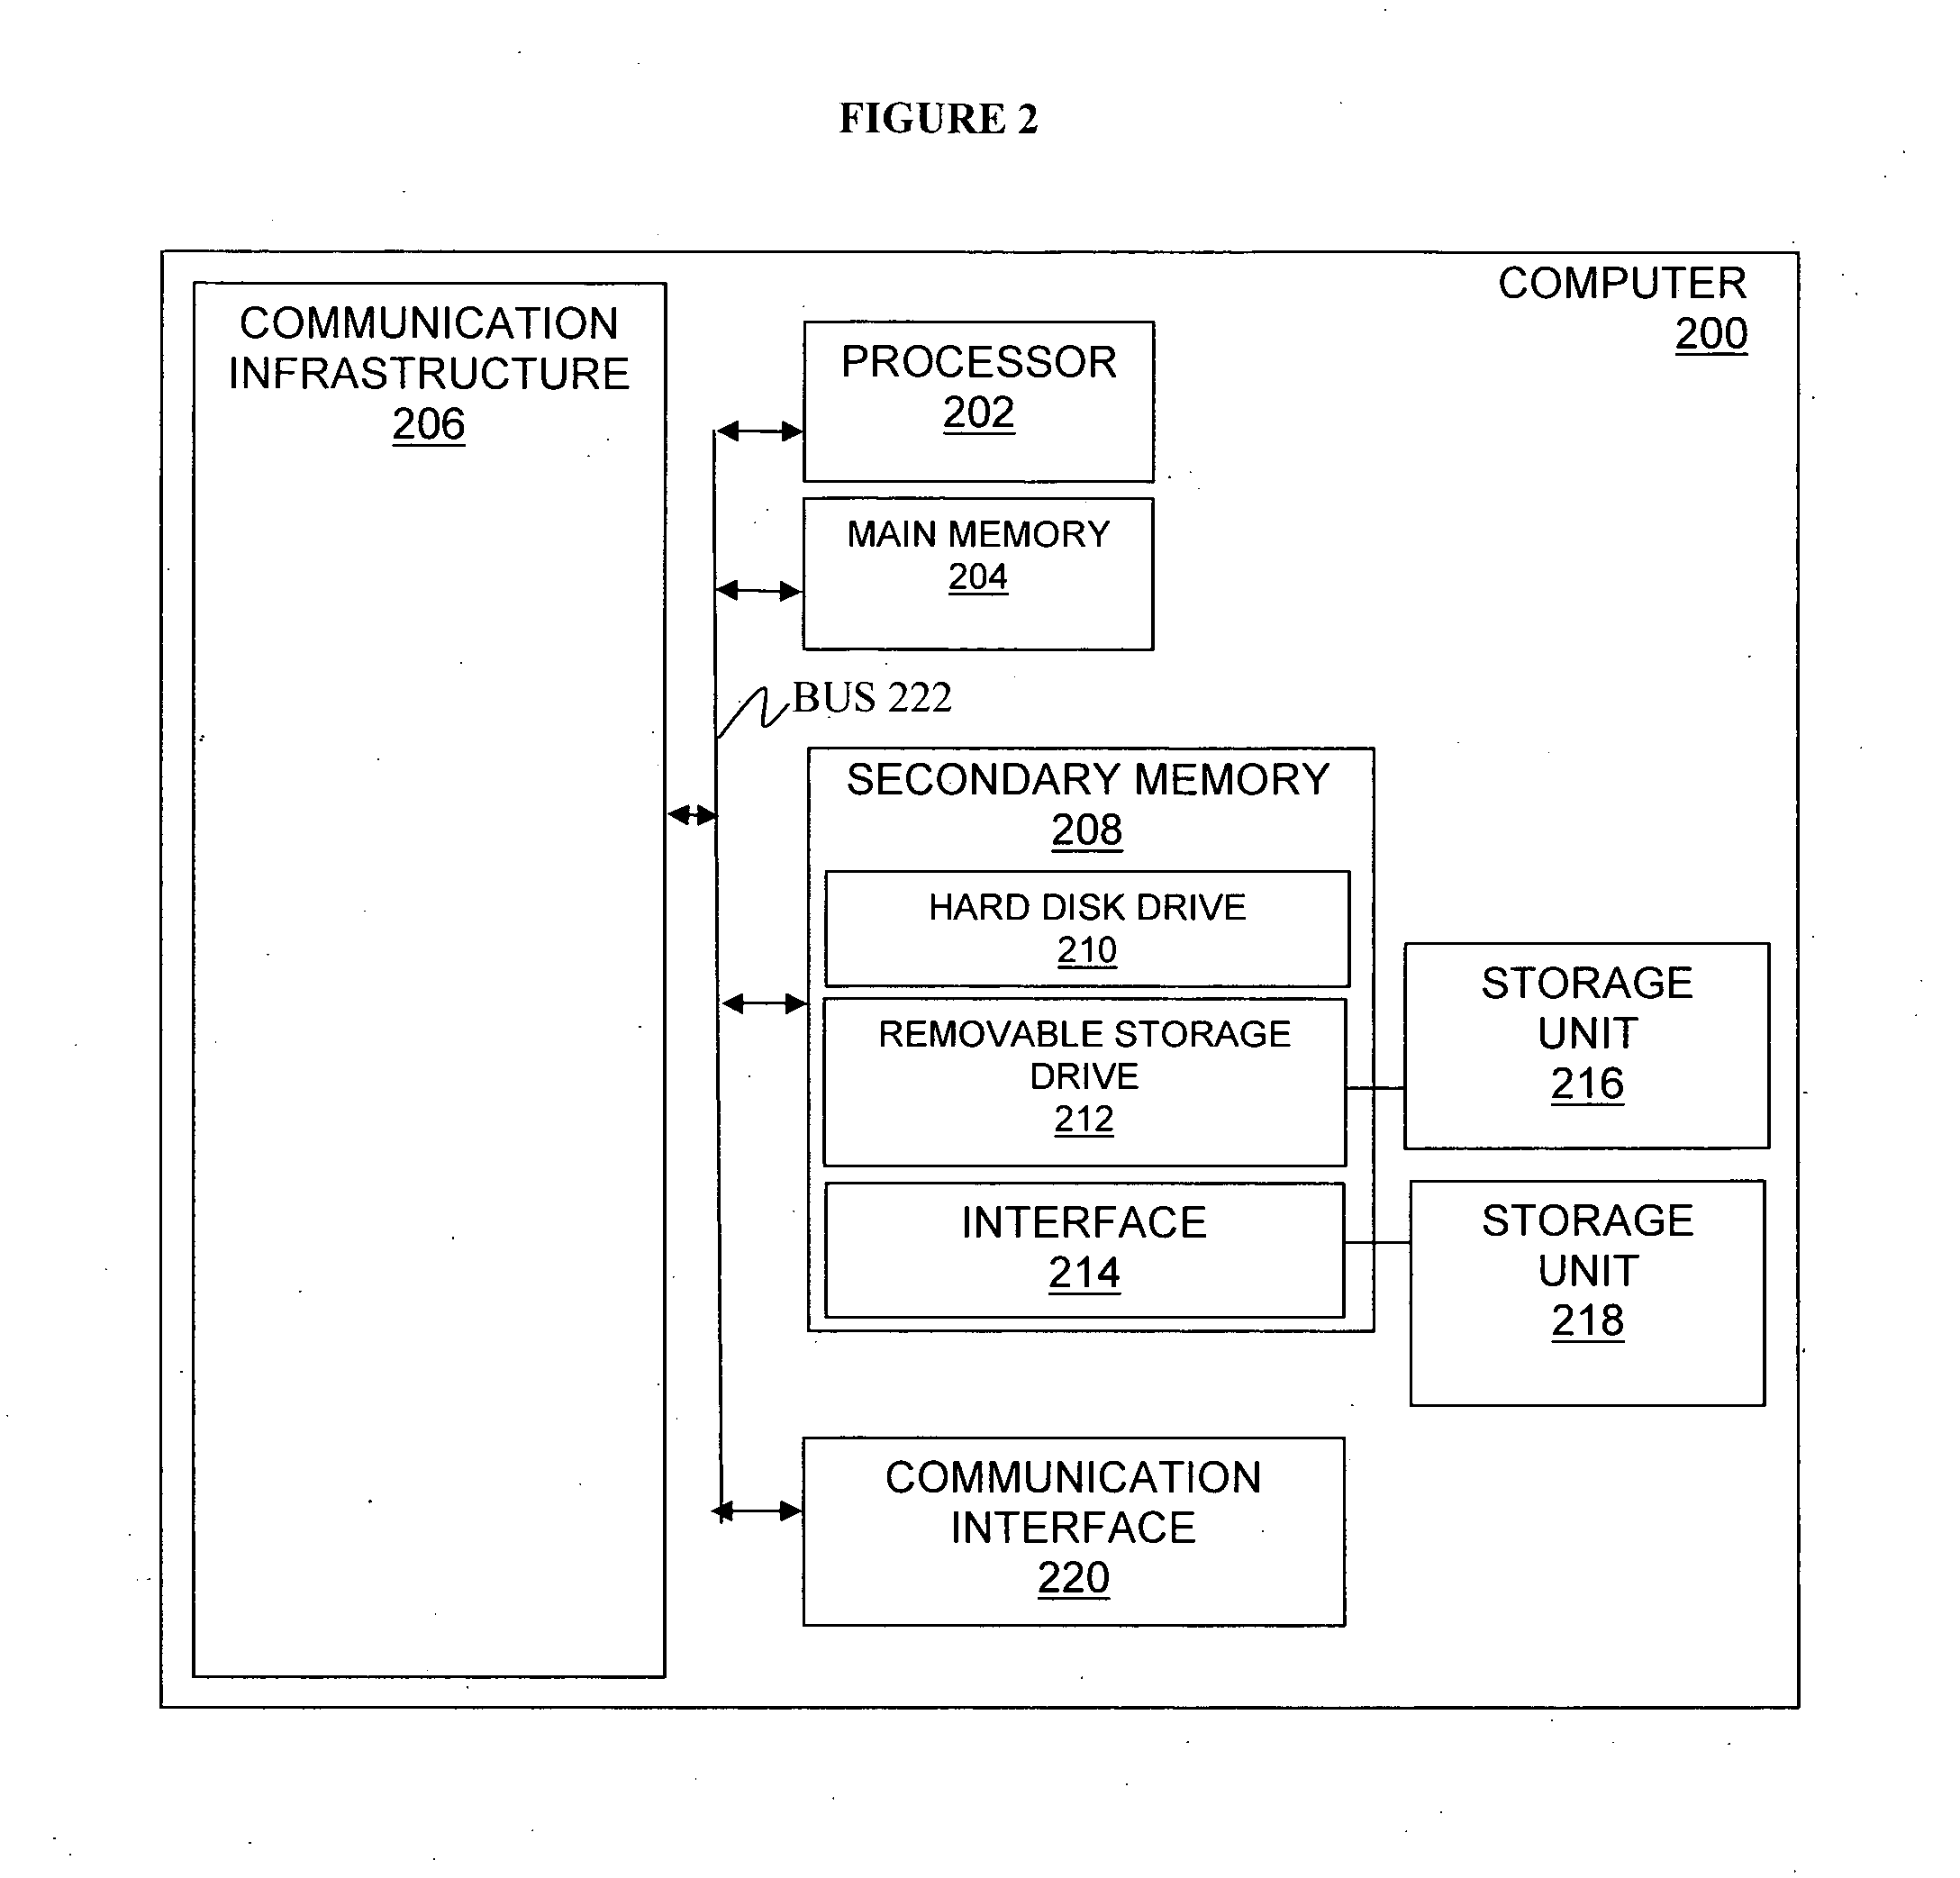 Laser Speckle Imaging Systems and Methods